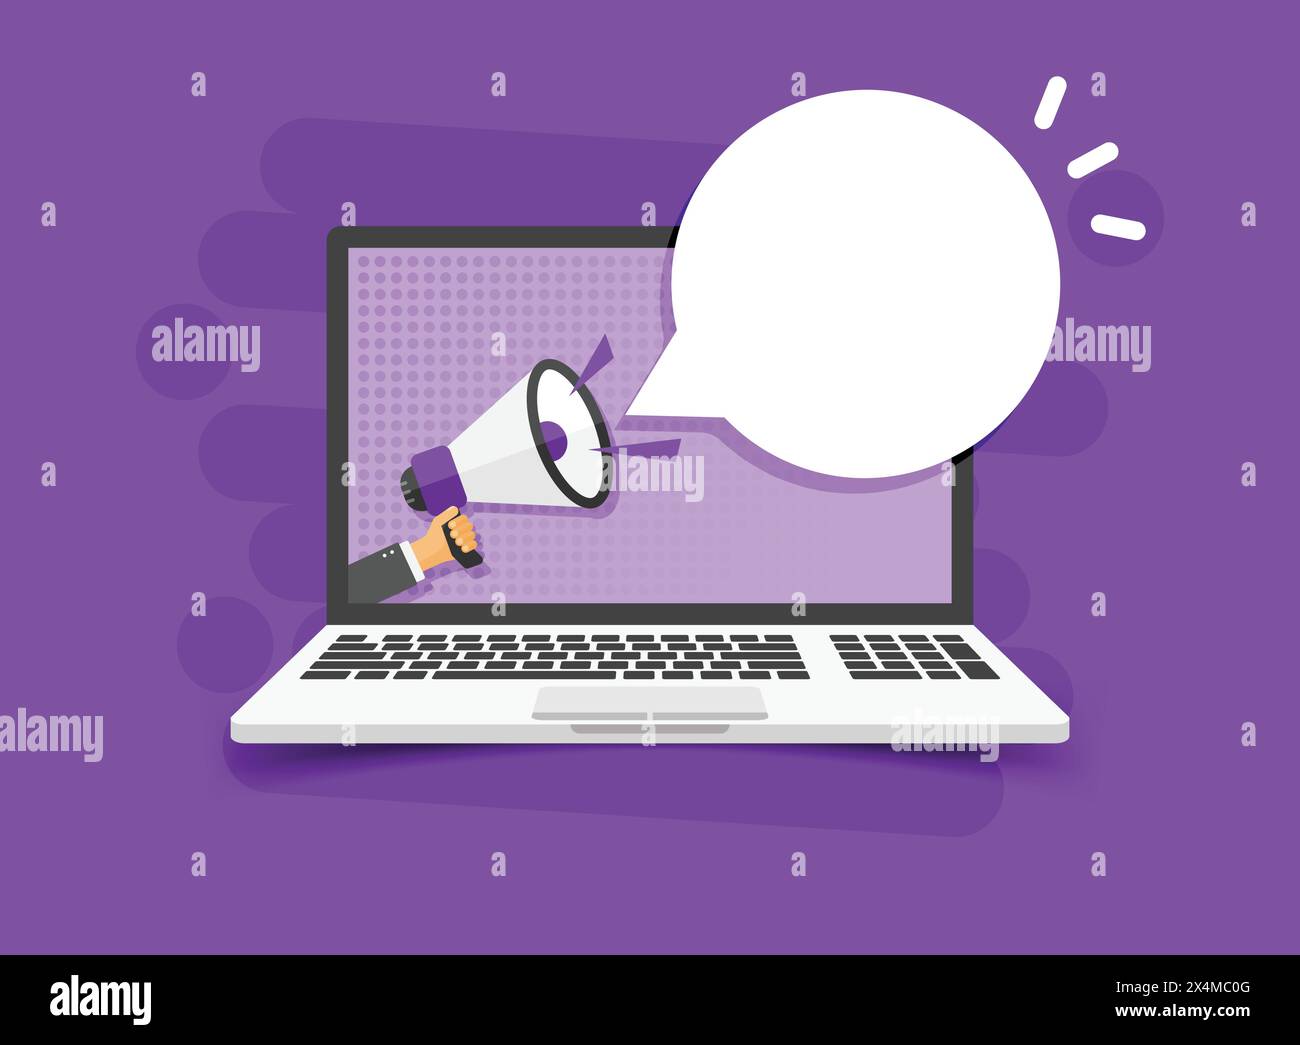 Laptop notification icon in flat style. Computer vector illustration on isolated background. Megaphone reminder sign business concept. Stock Vector